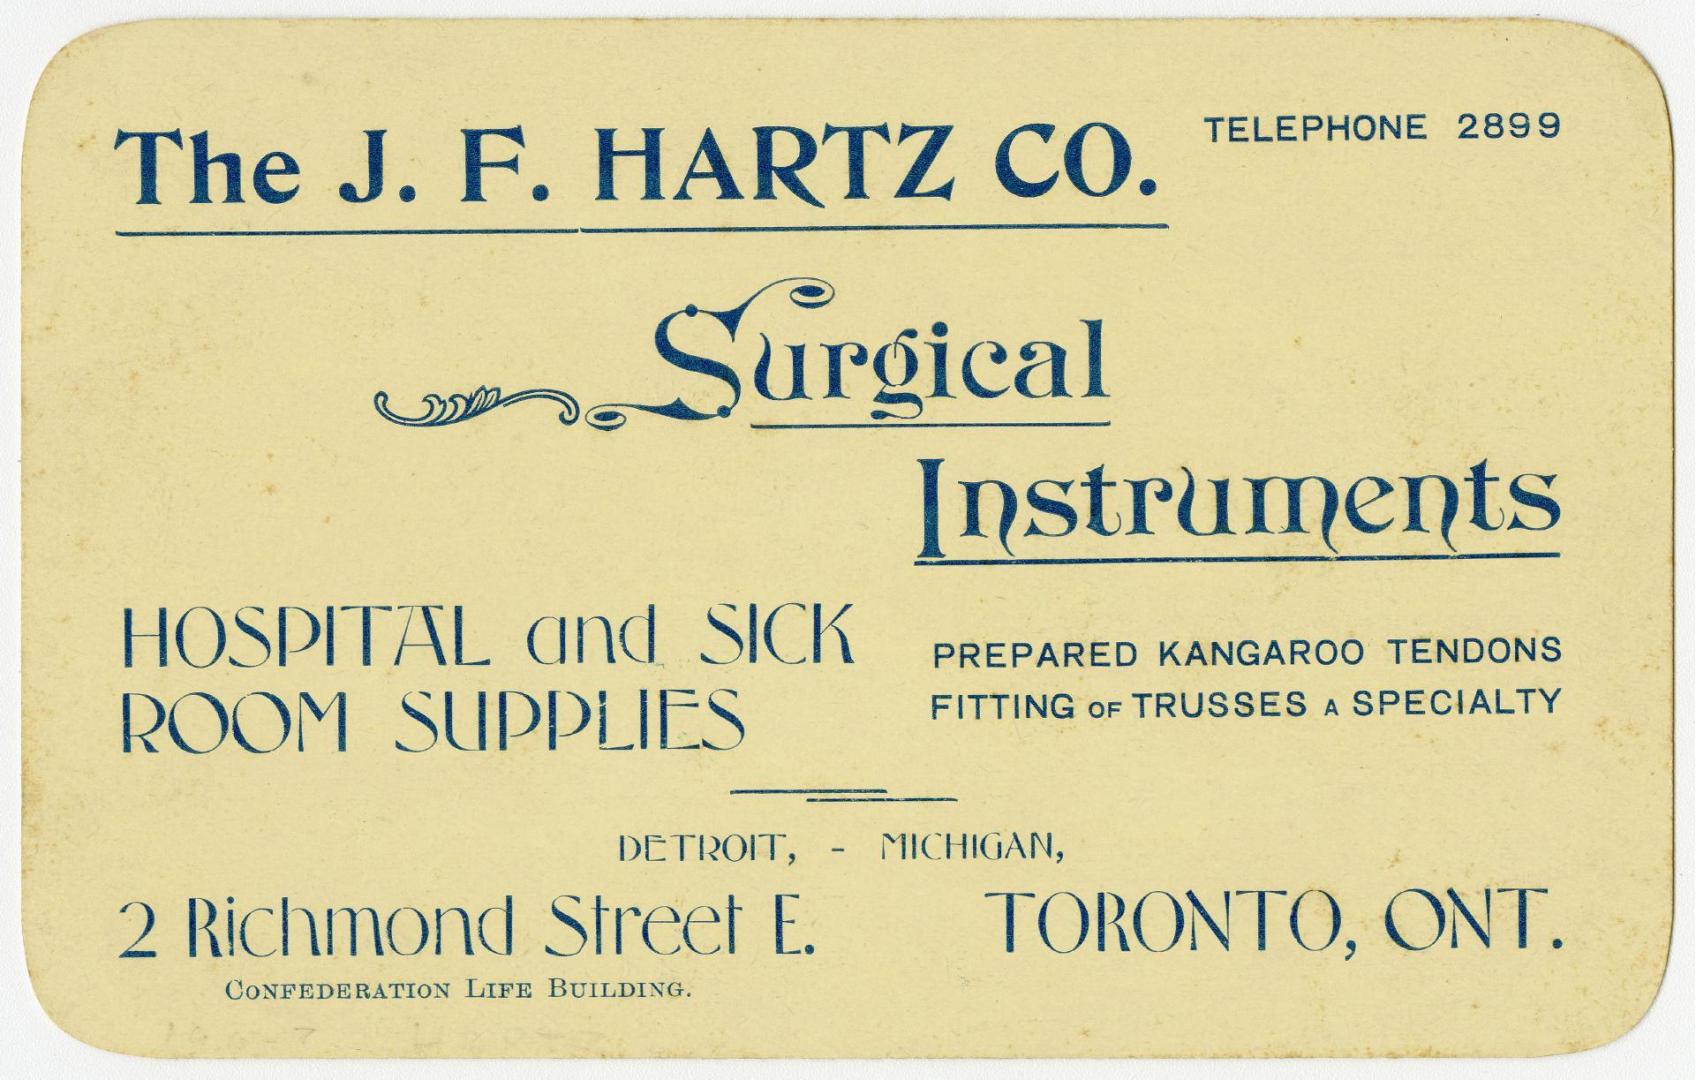 The J.F. Hartz Co. surgical instruments